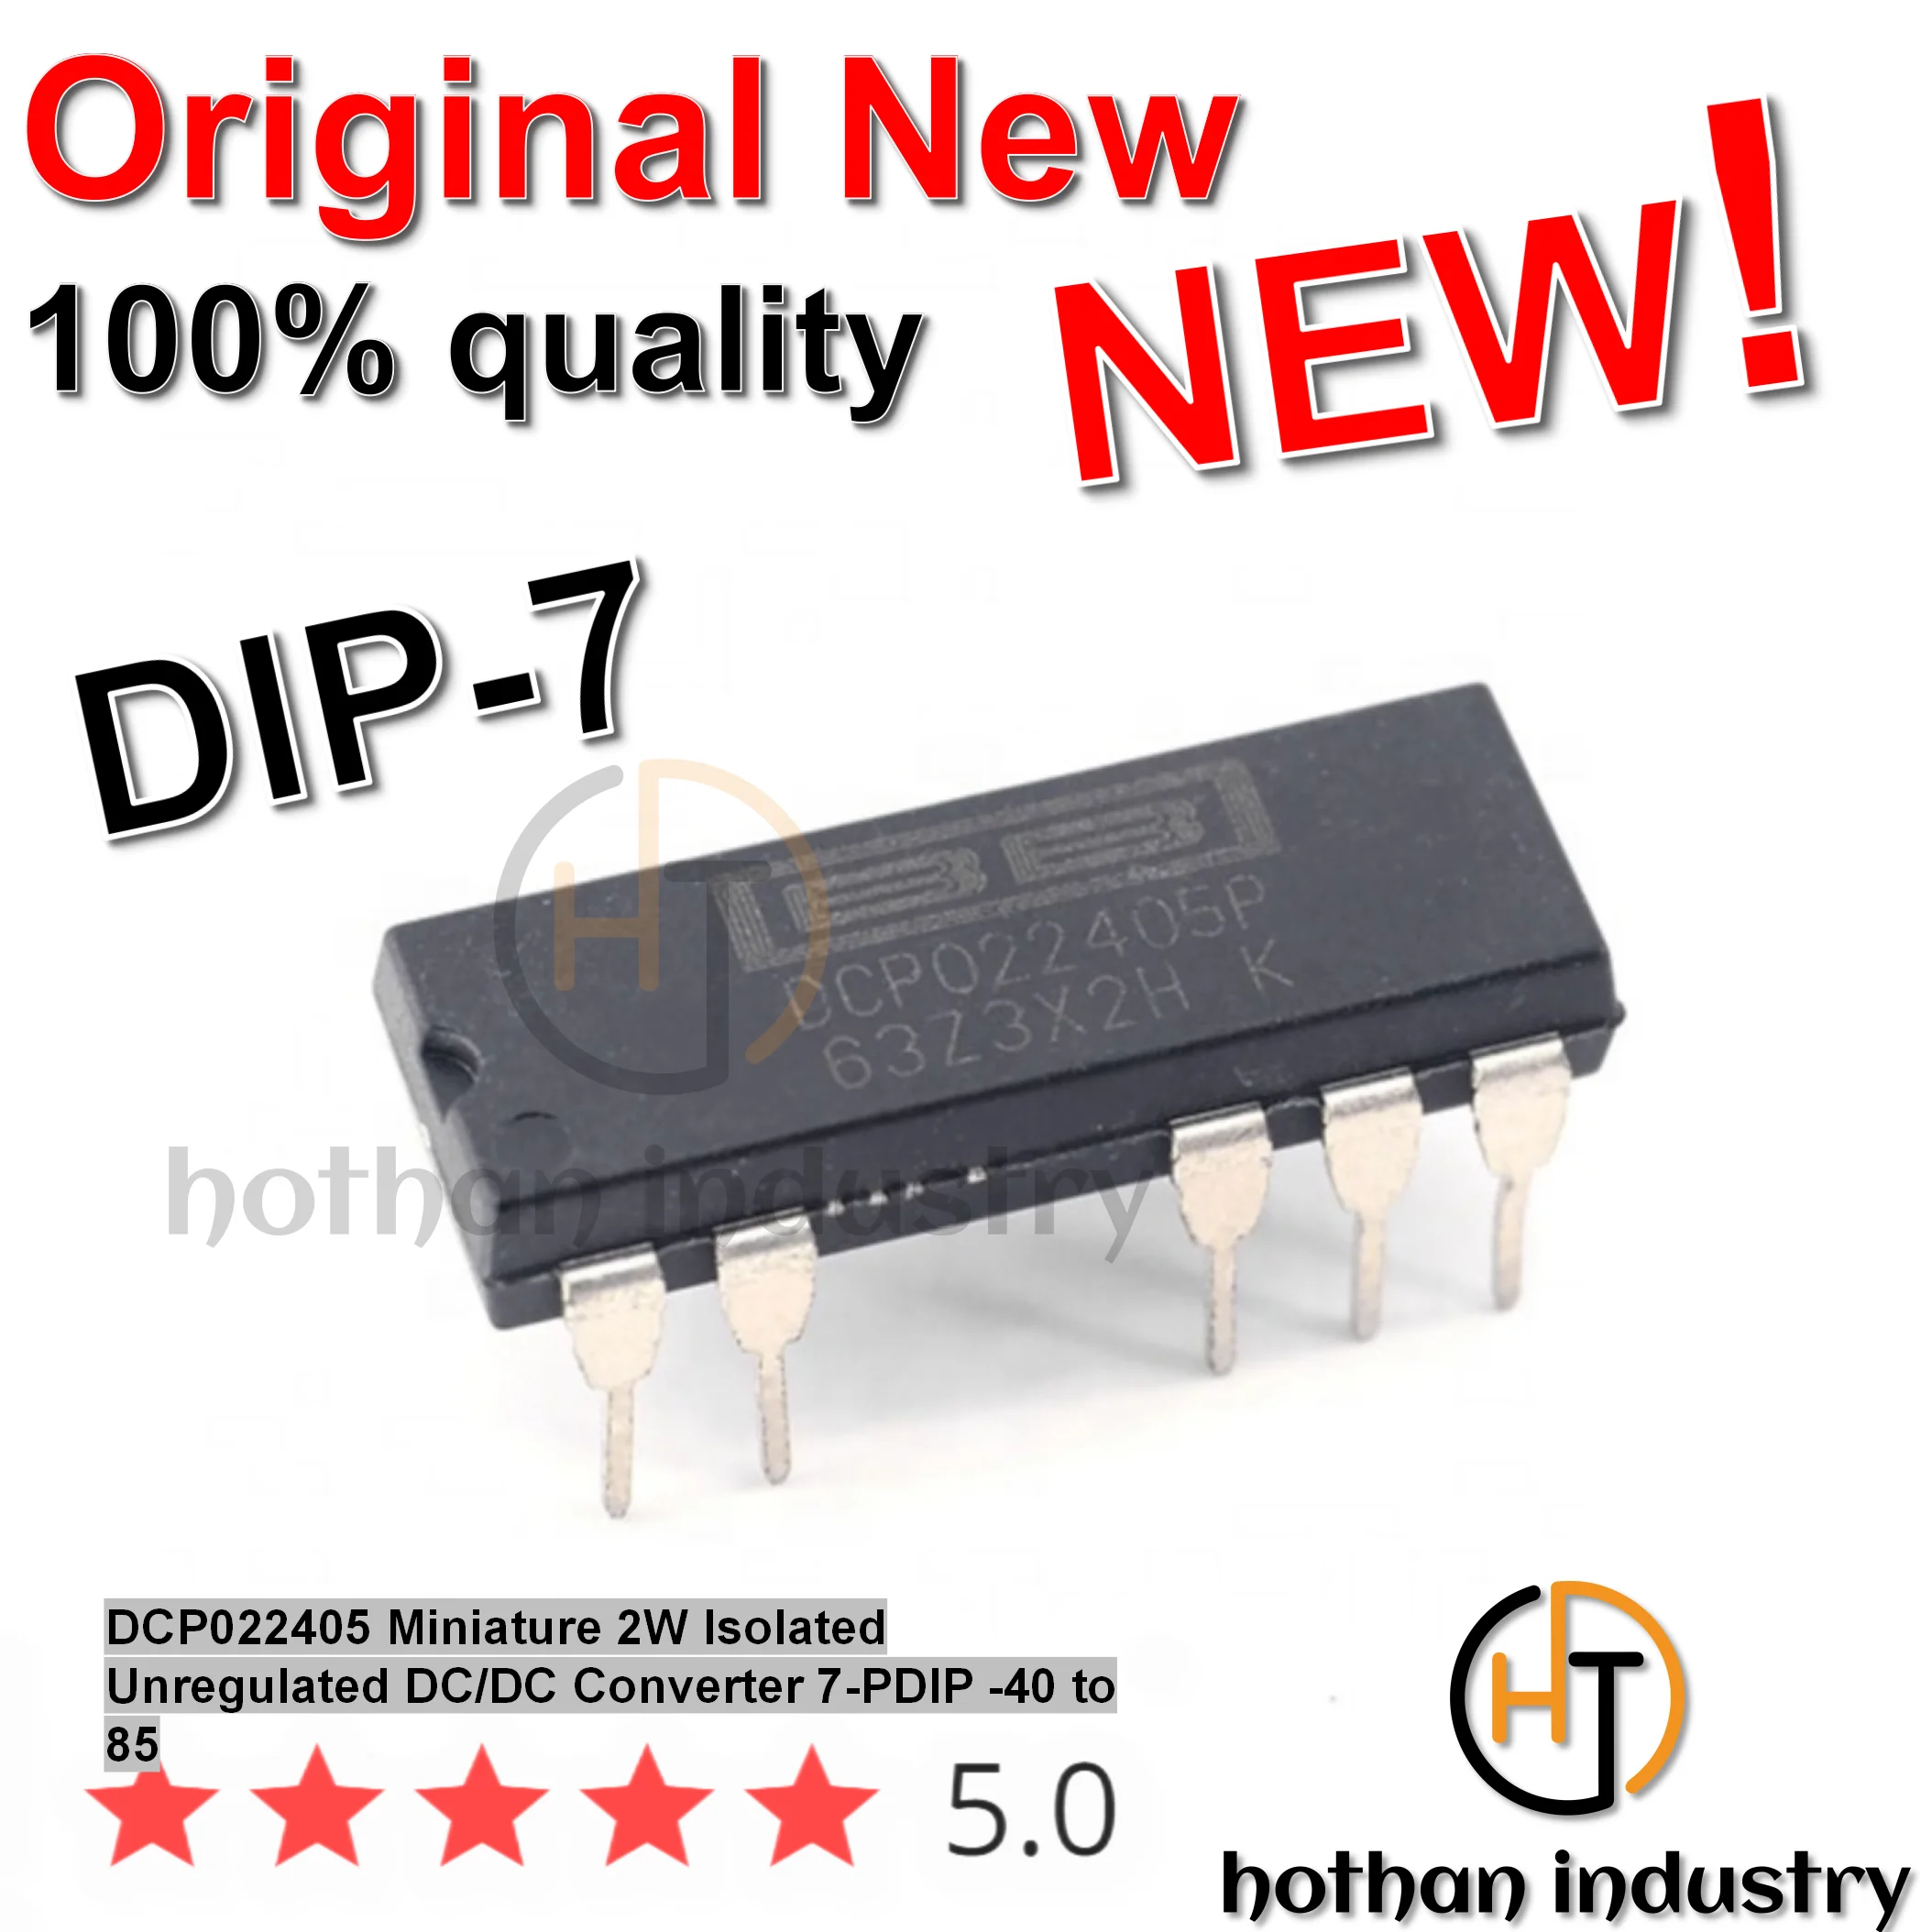 【10pcs】2021+ hothan 100% Imported Orignal New DCP022405 Miniature 2W Isolated Unregulated DC/DC Converter 7-PDIP -40 to 85